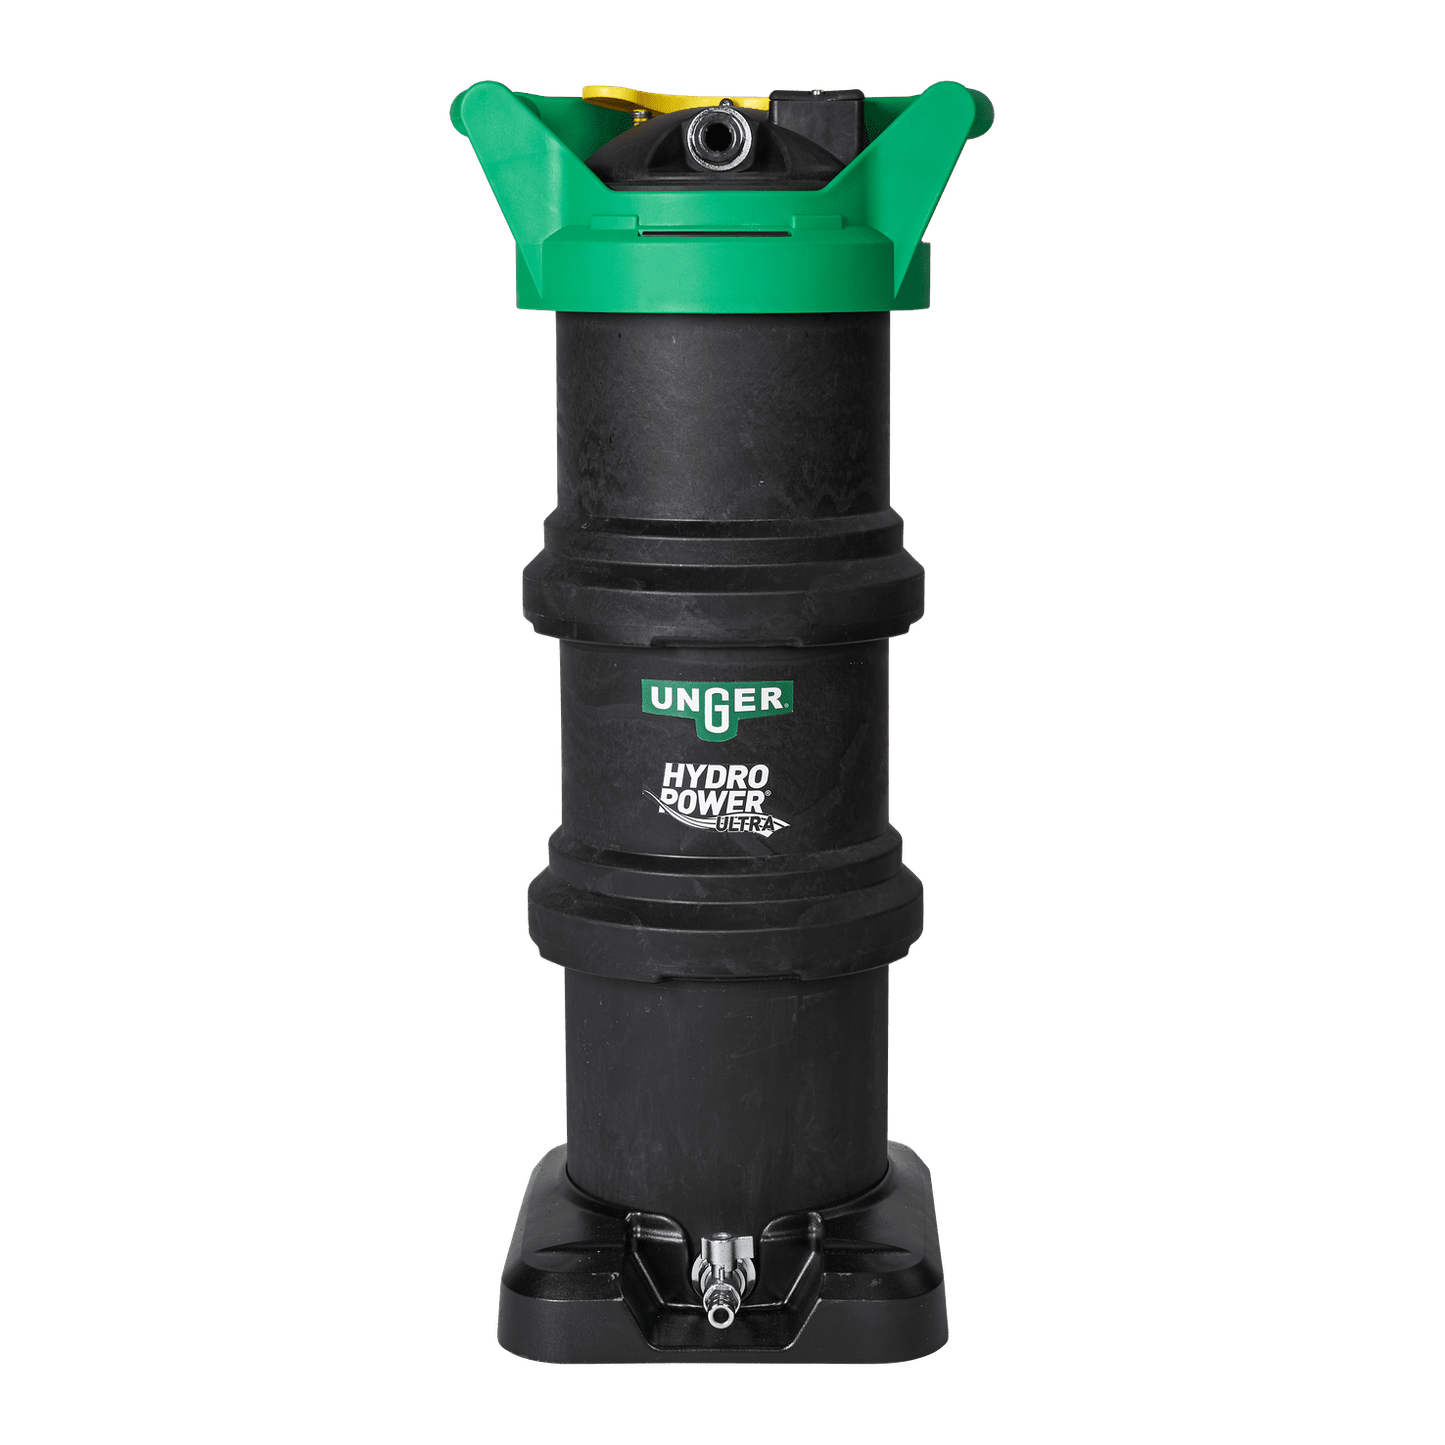 UNGER Hydro Power Ultra Filter L